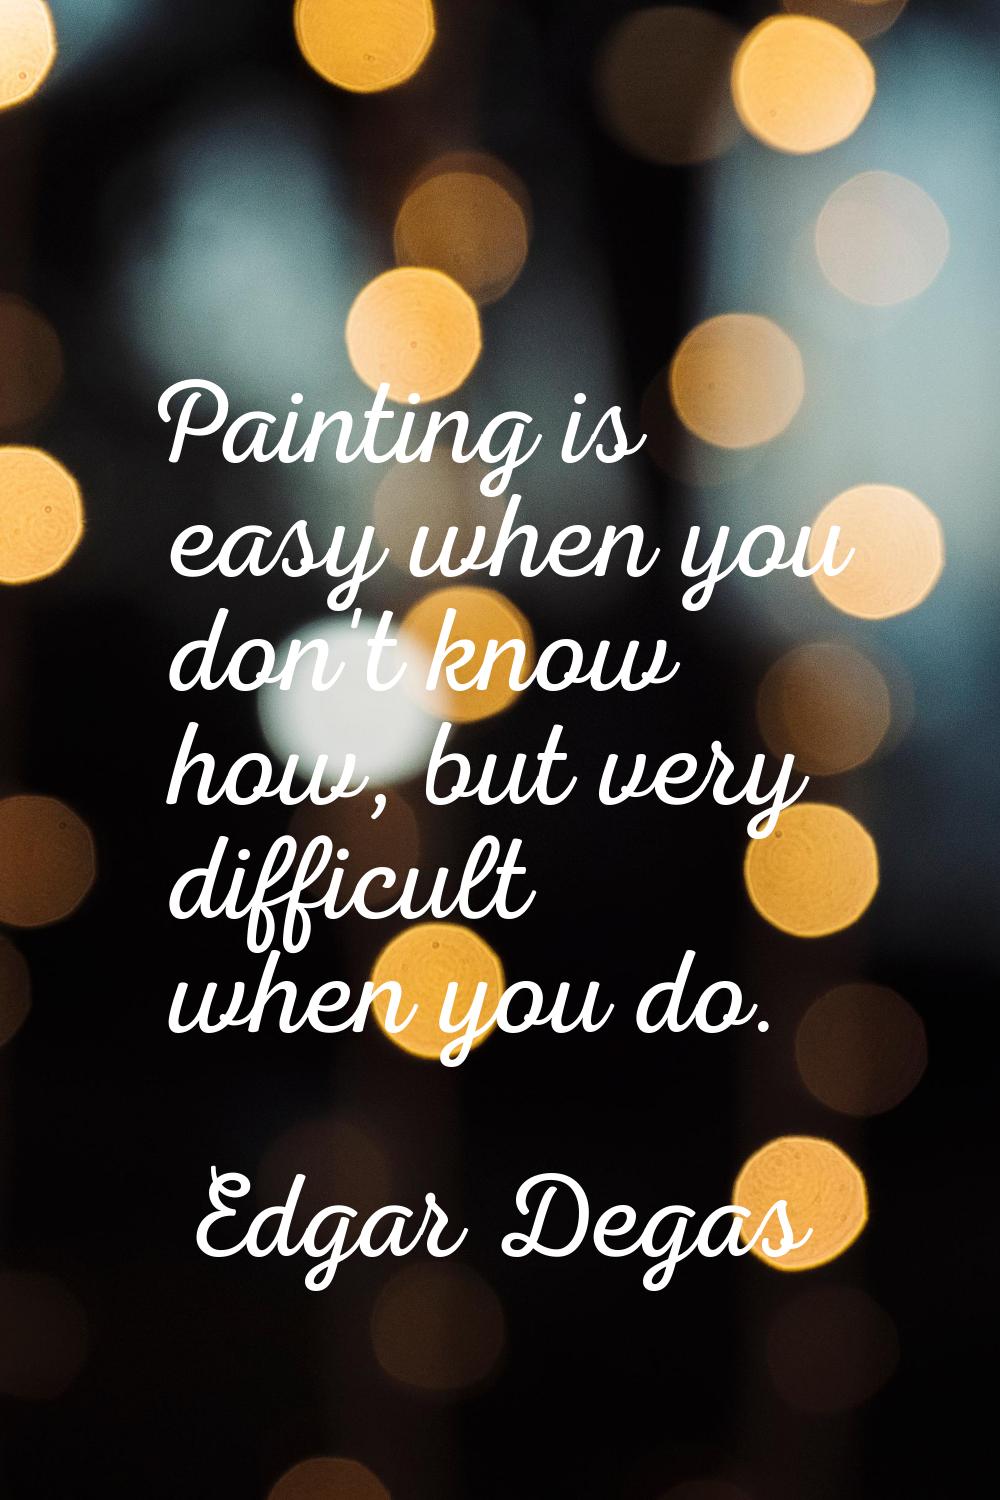 Painting is easy when you don't know how, but very difficult when you do.